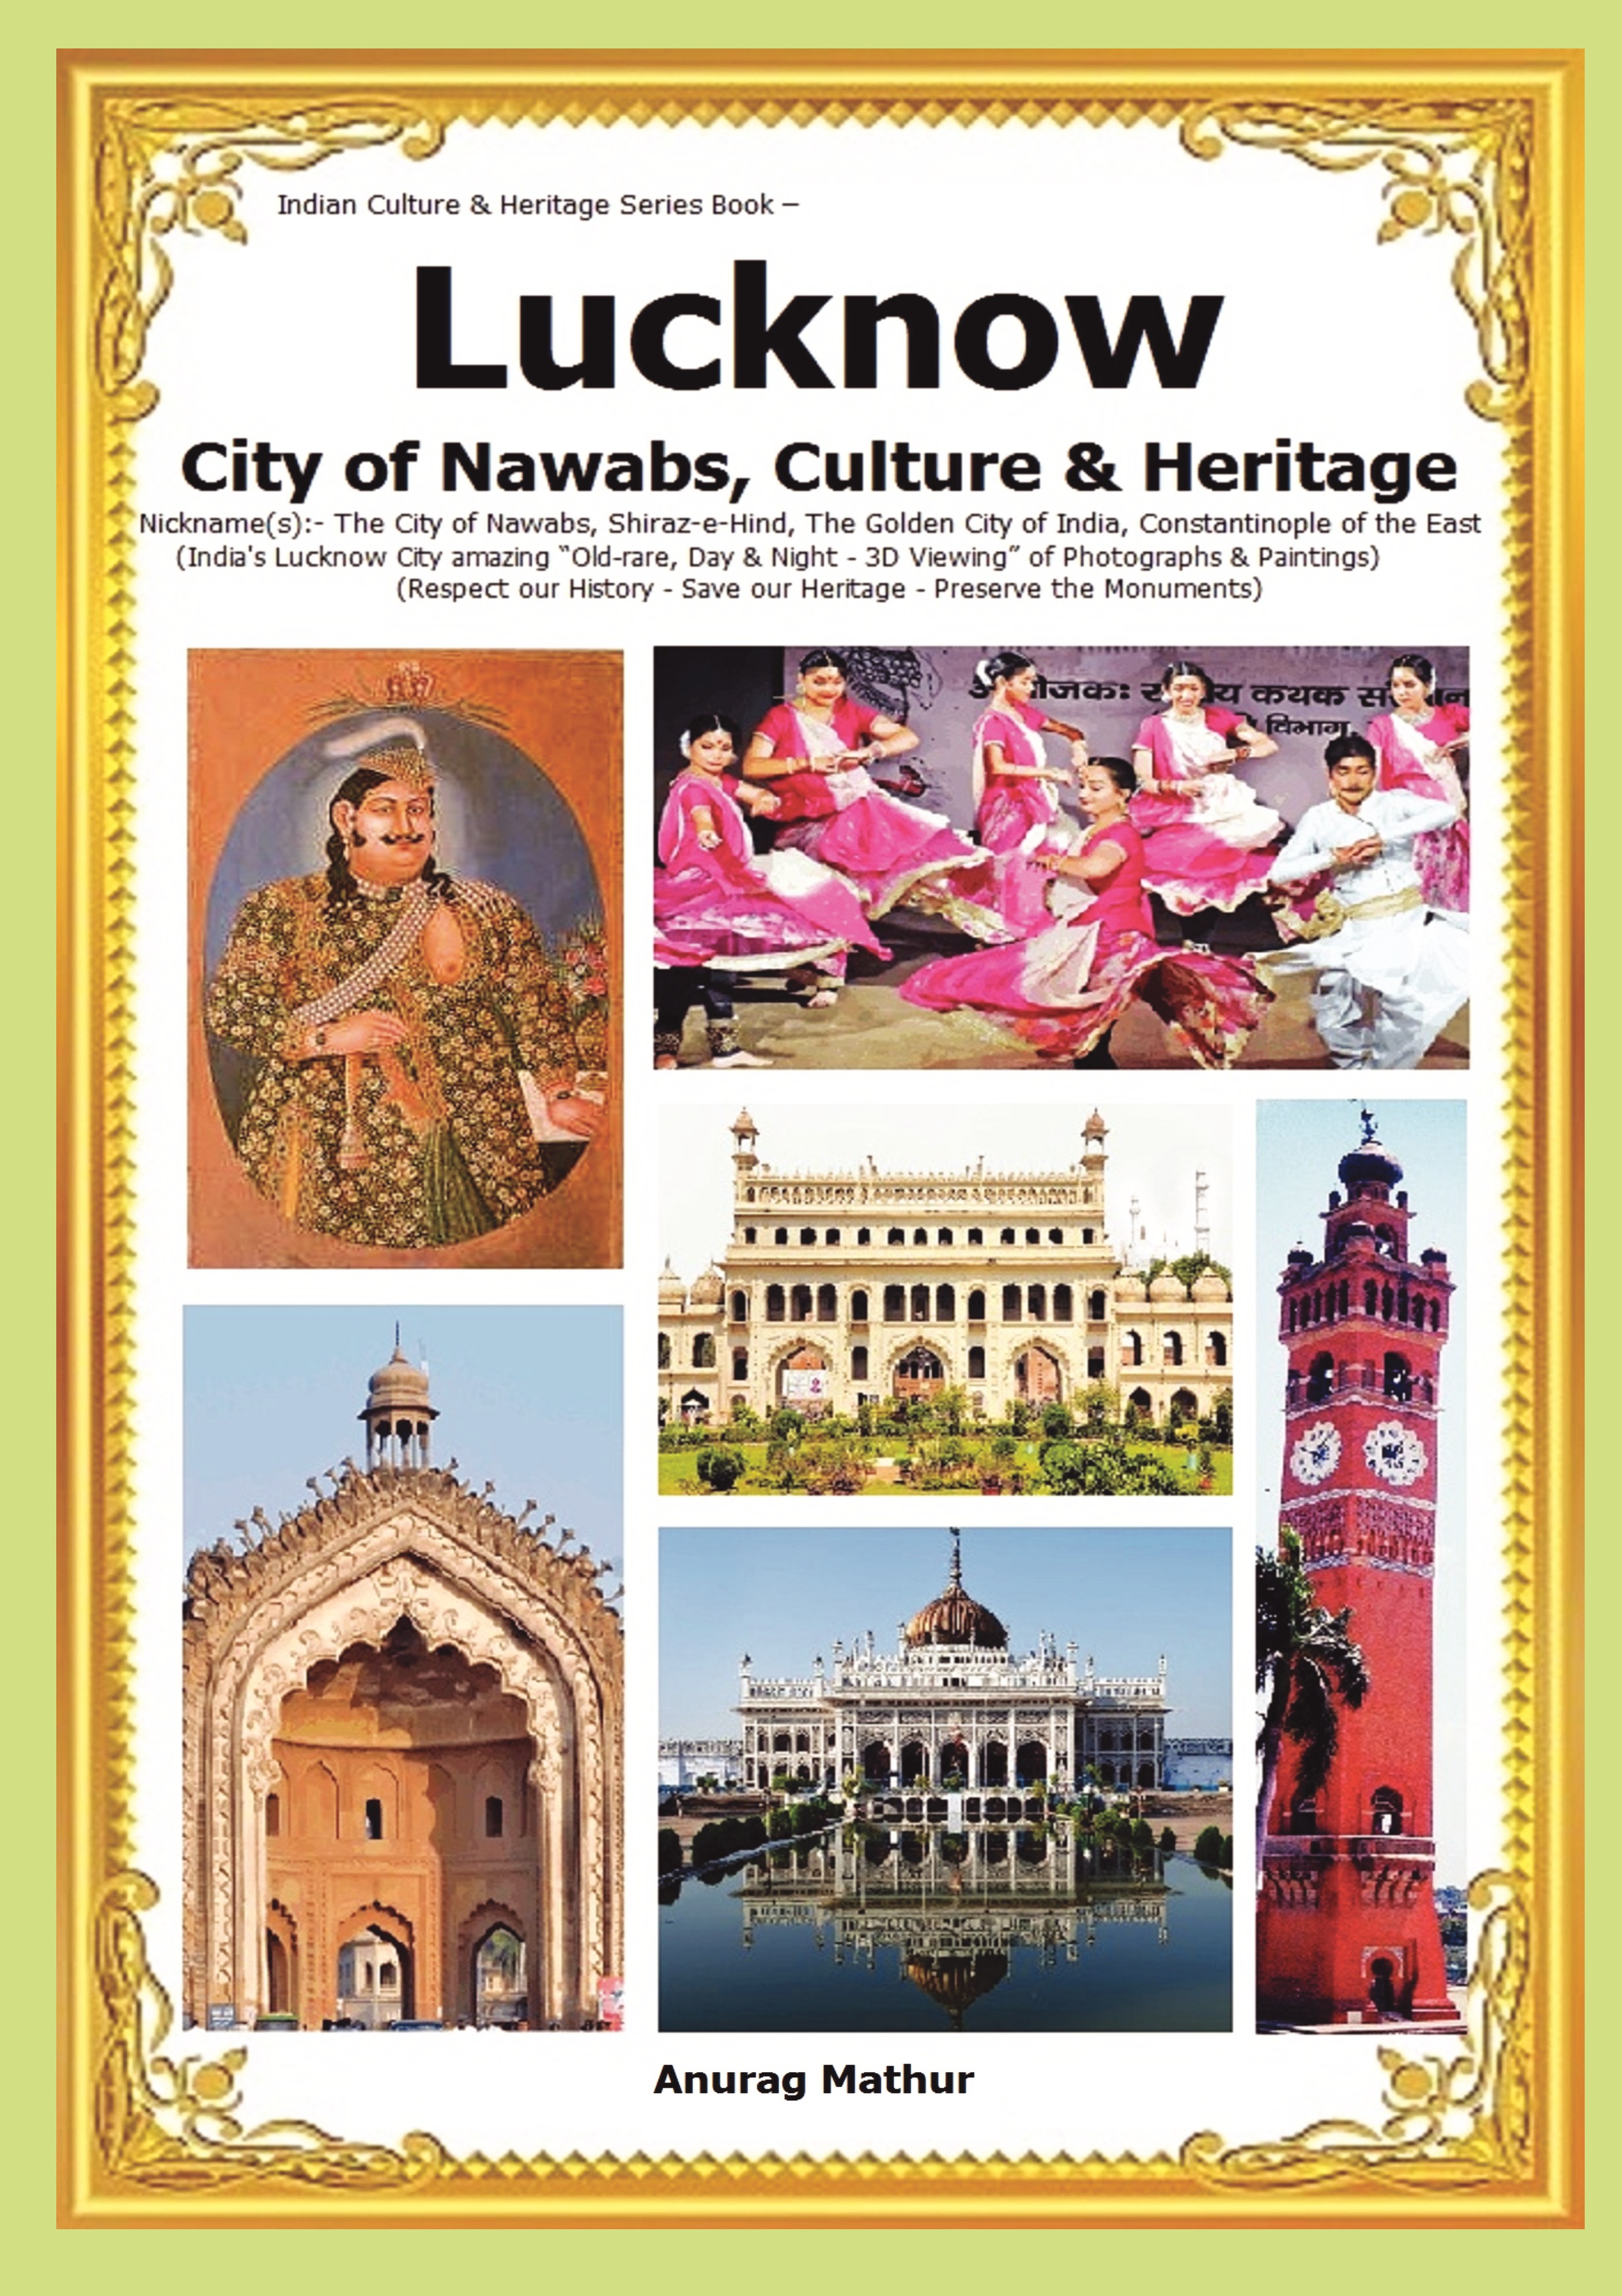 Lucknow City of Nawabs, Culture & Heritage